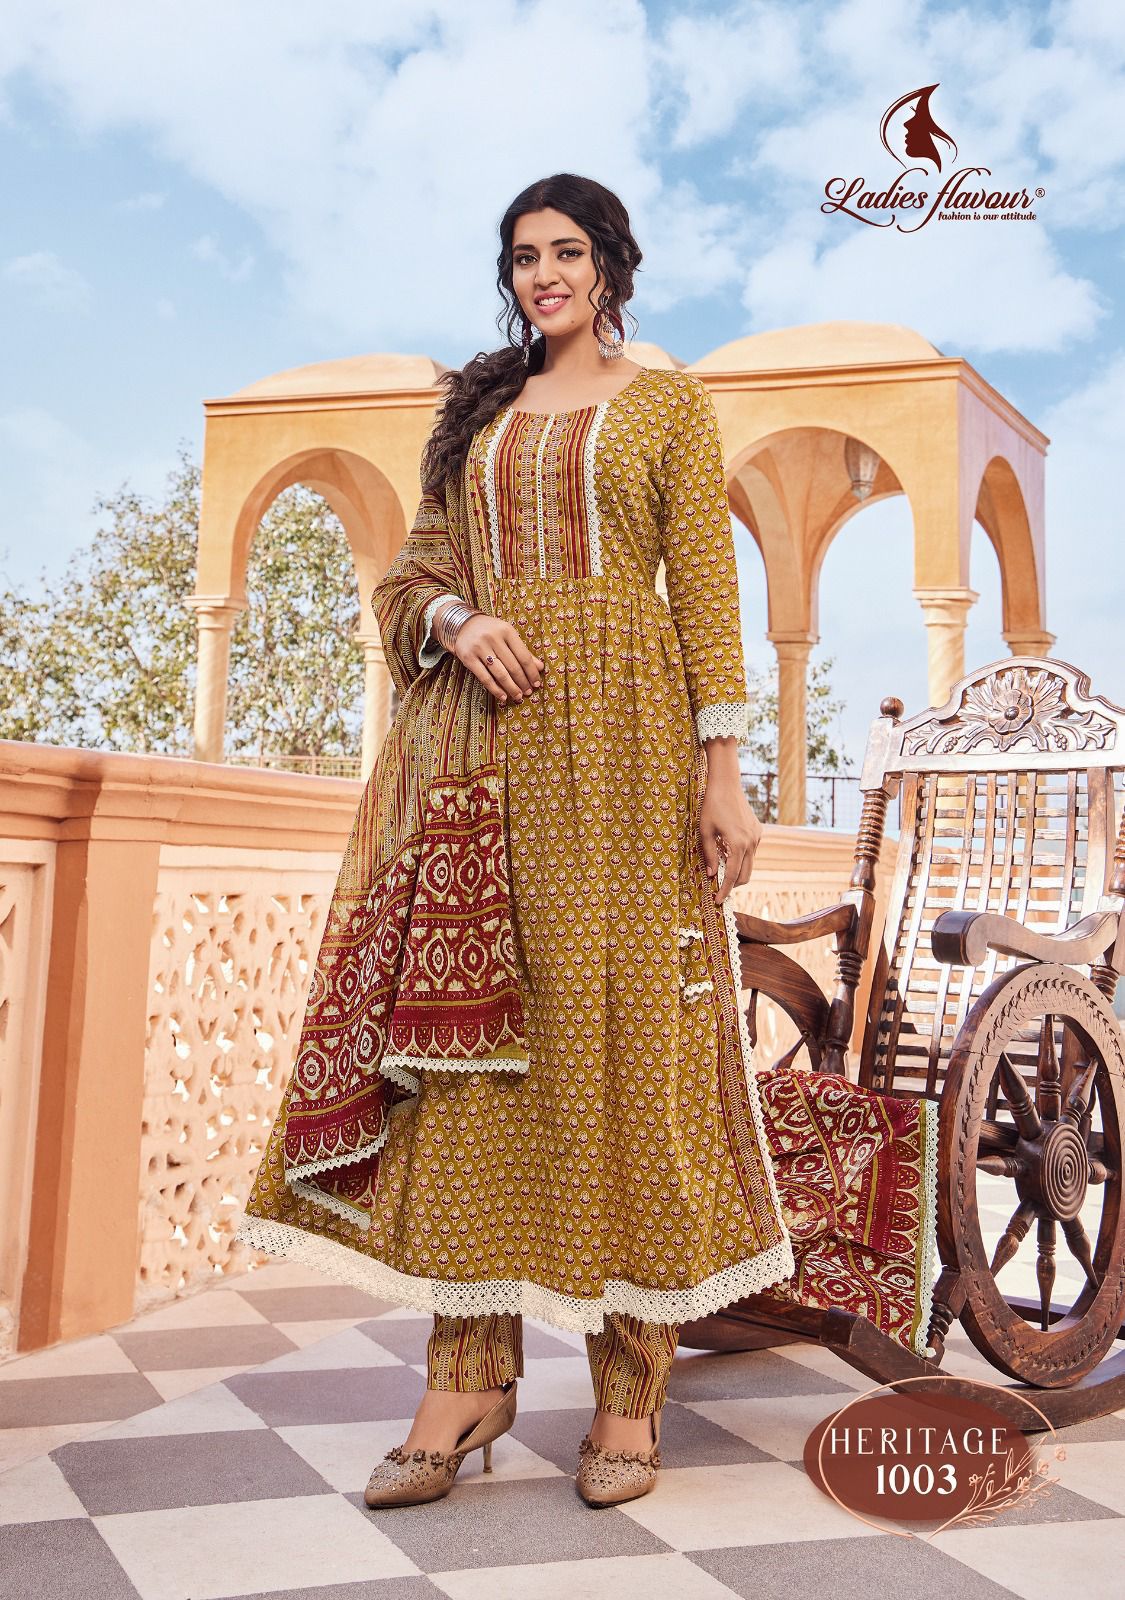 Ladies Flavour Heritage collection 8